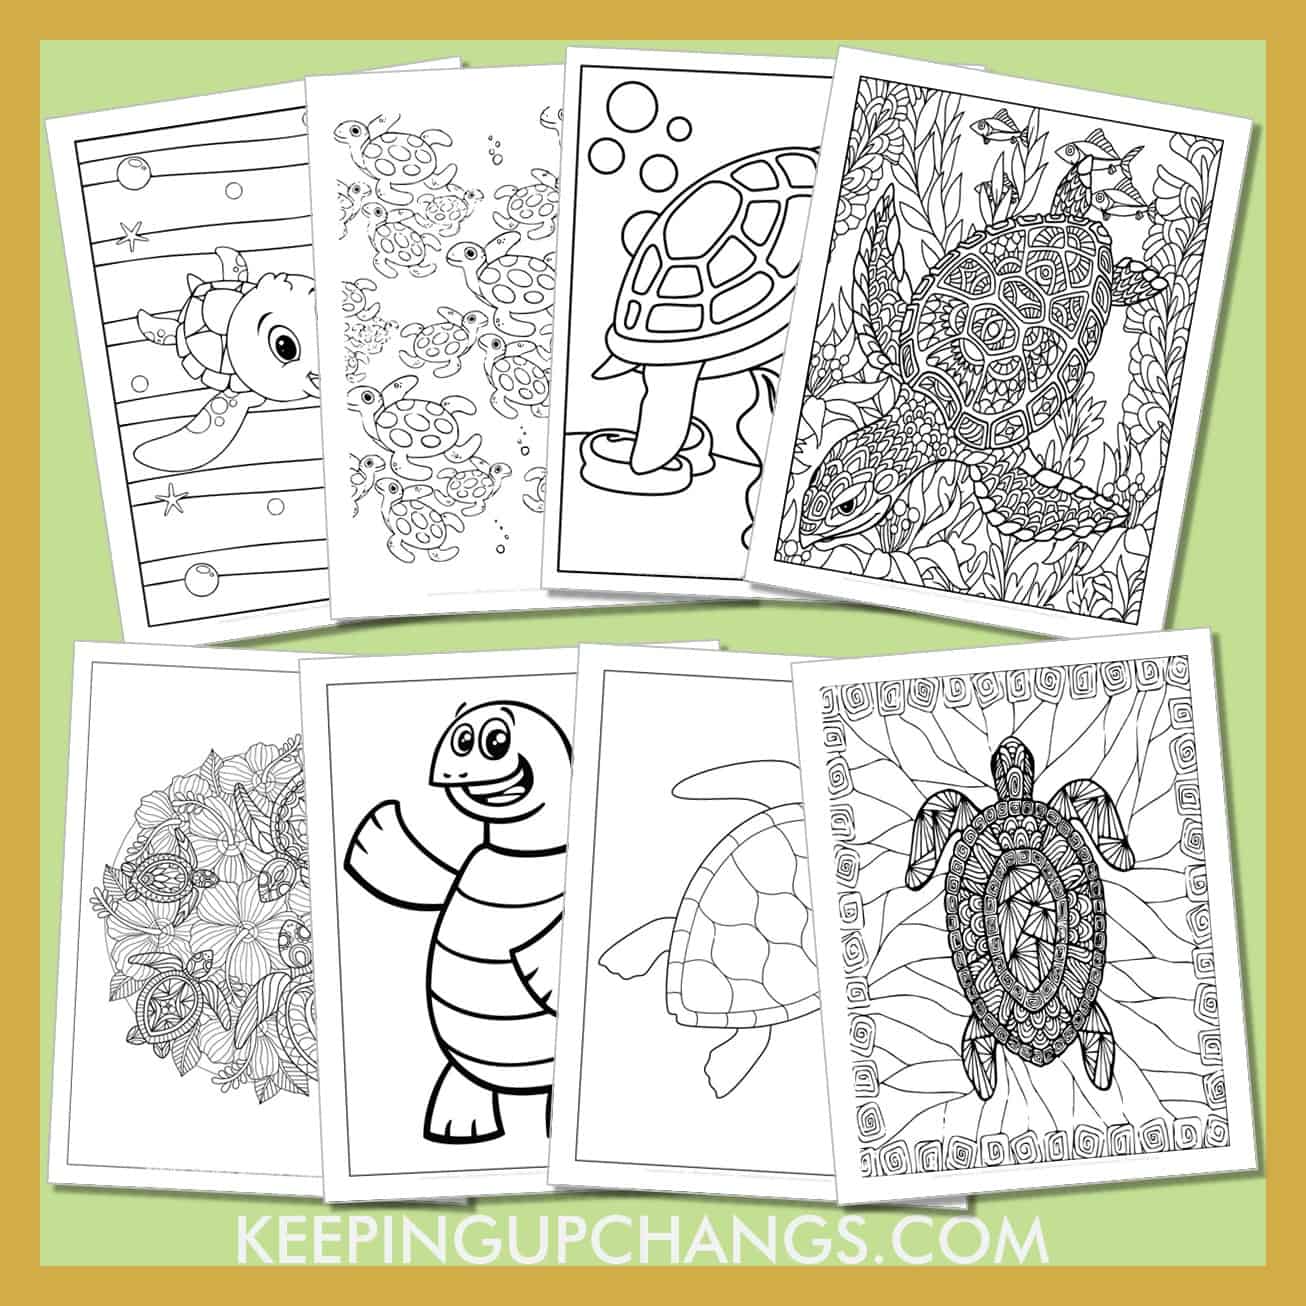 free turtle pictures to color for toddlers, kids, adults.